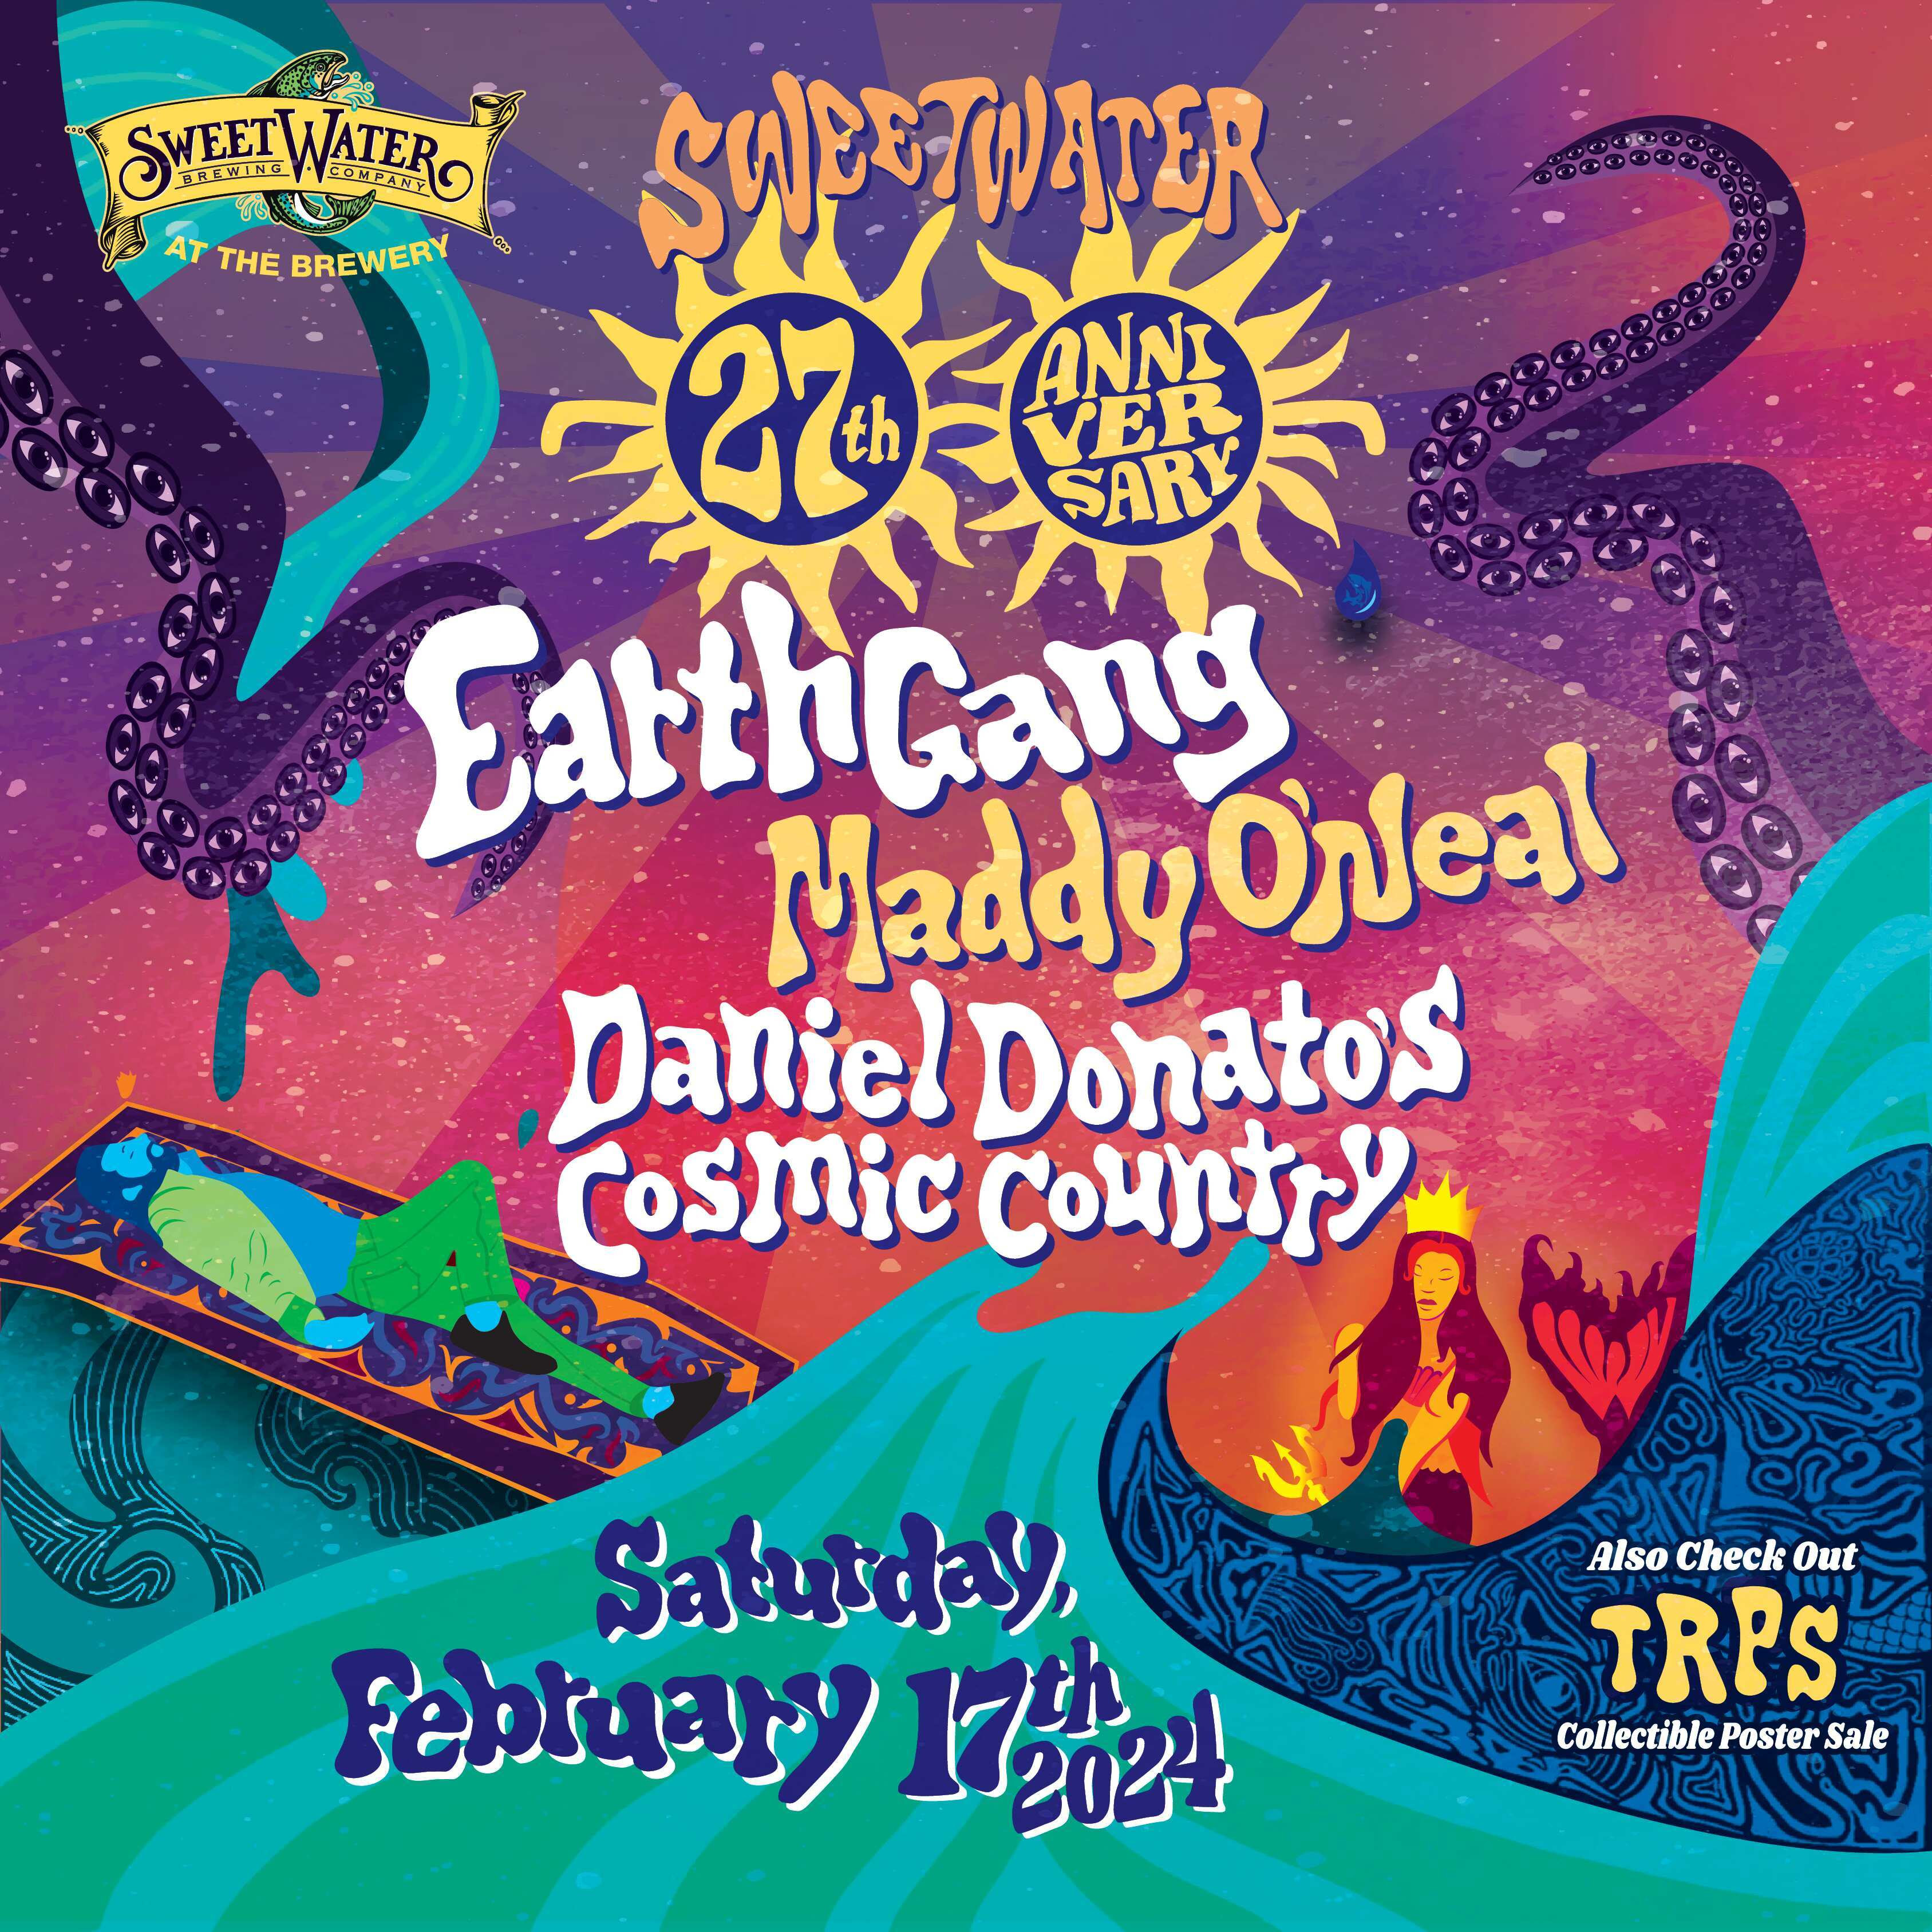 EarthGang to Headline and Light Up SweetWater Anniversary